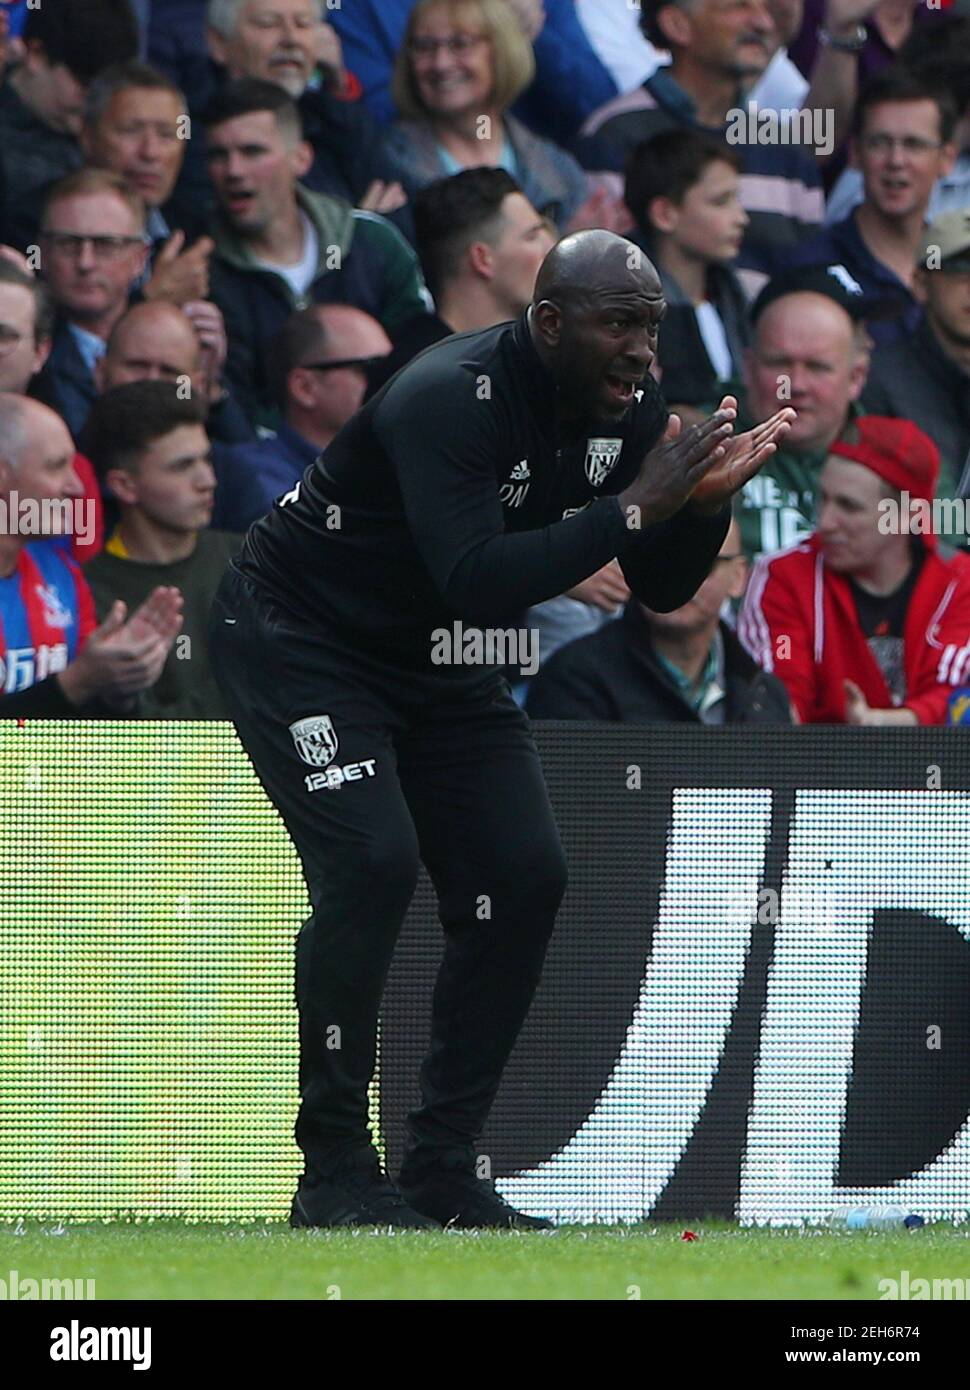 Soccer Football - Premier League - Crystal Palace vs West Bromwich Albion - Selhurst Park, London, Britain - May 13, 2018   West Bromwich Albion caretaker manager Darren Moore during the match   REUTERS/Hannah McKay    EDITORIAL USE ONLY. No use with unauthorized audio, video, data, fixture lists, club/league logos or 'live' services. Online in-match use limited to 75 images, no video emulation. No use in betting, games or single club/league/player publications.  Please contact your account representative for further details. Stock Photo